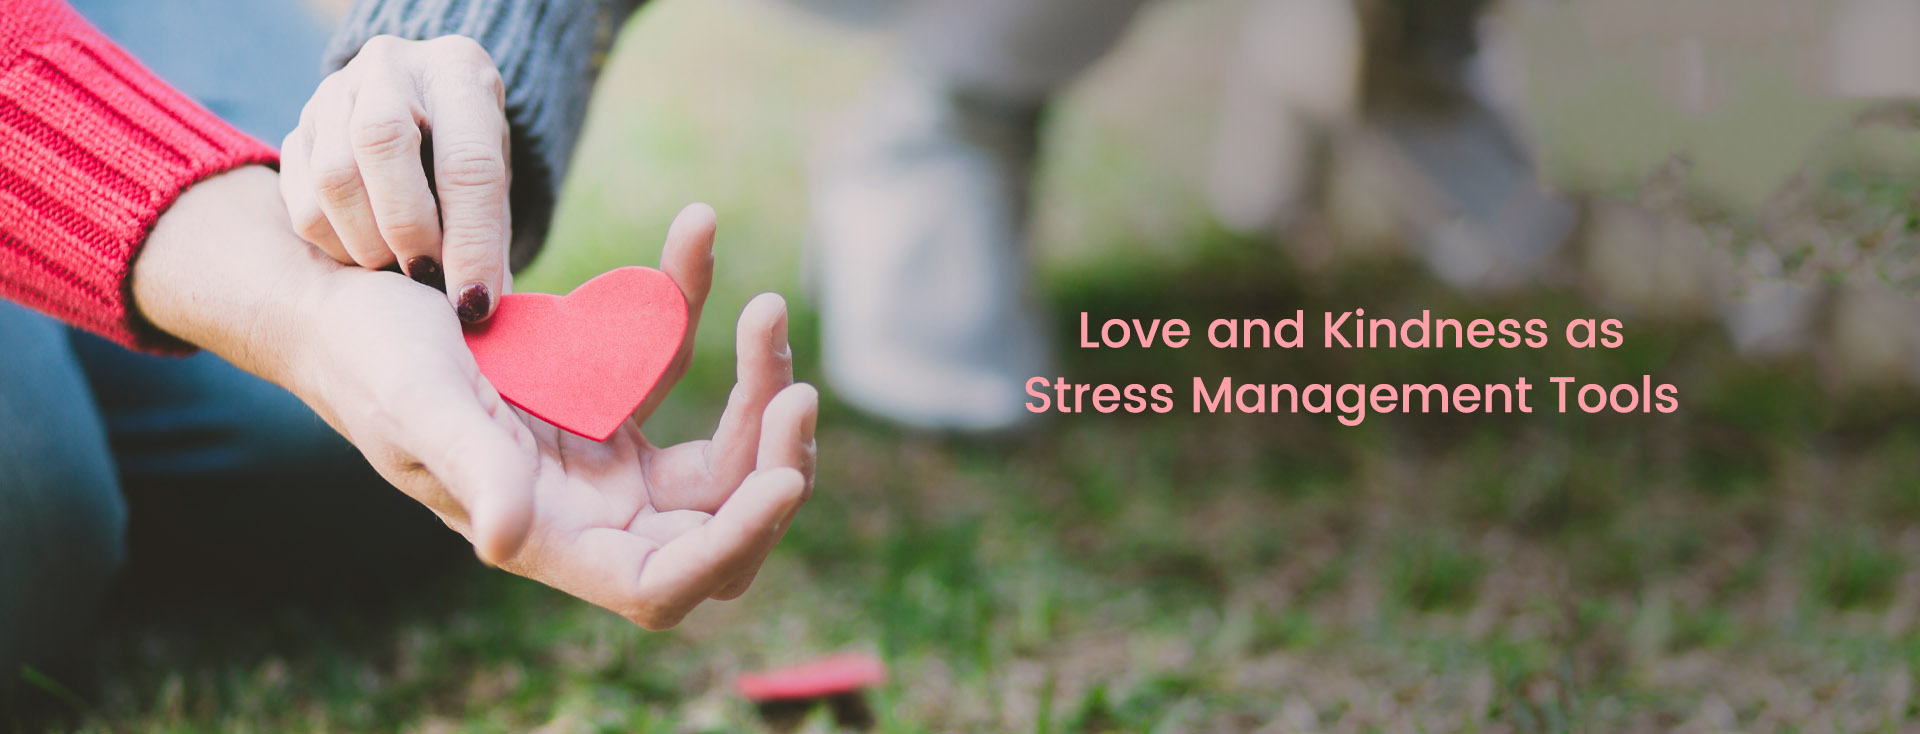 Love and Kindness as Stress Management Tools this April